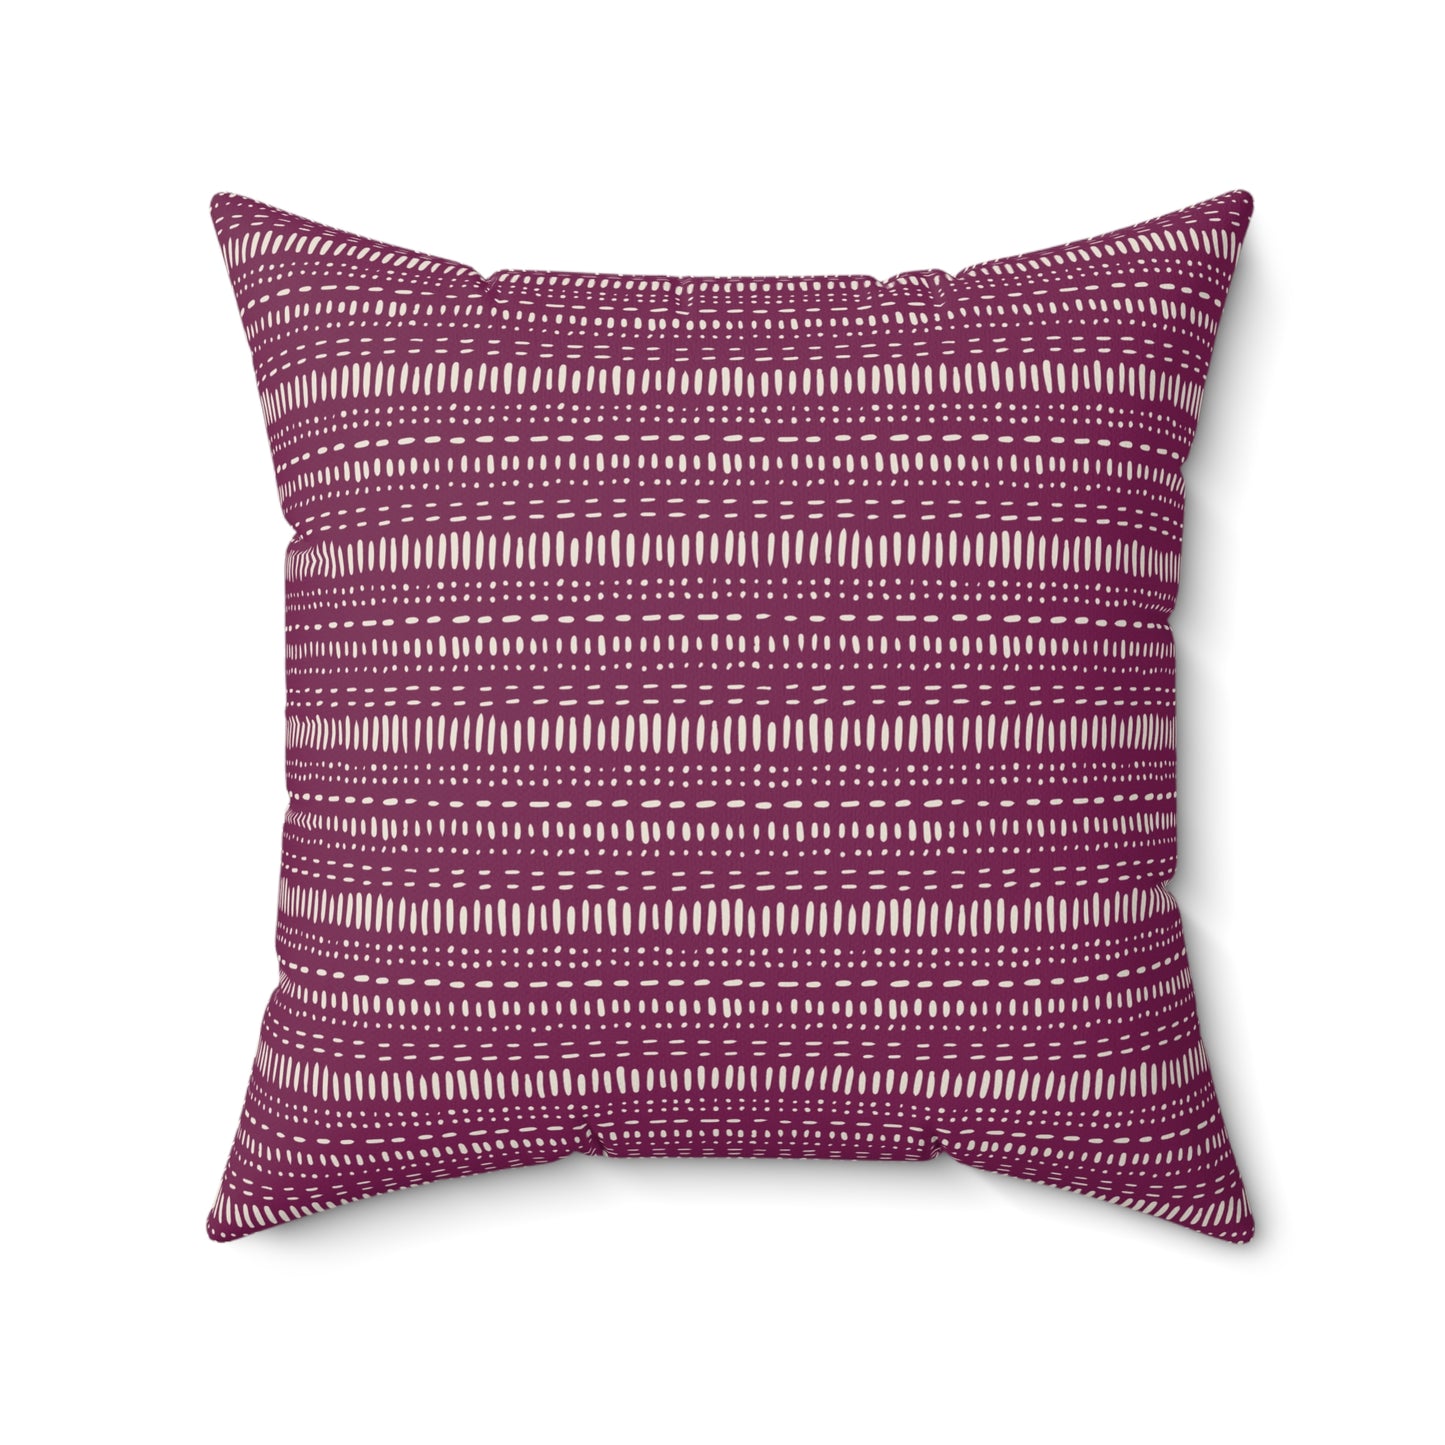 Boho Vibes Pattern 8 - Faux Suede Square Pillow